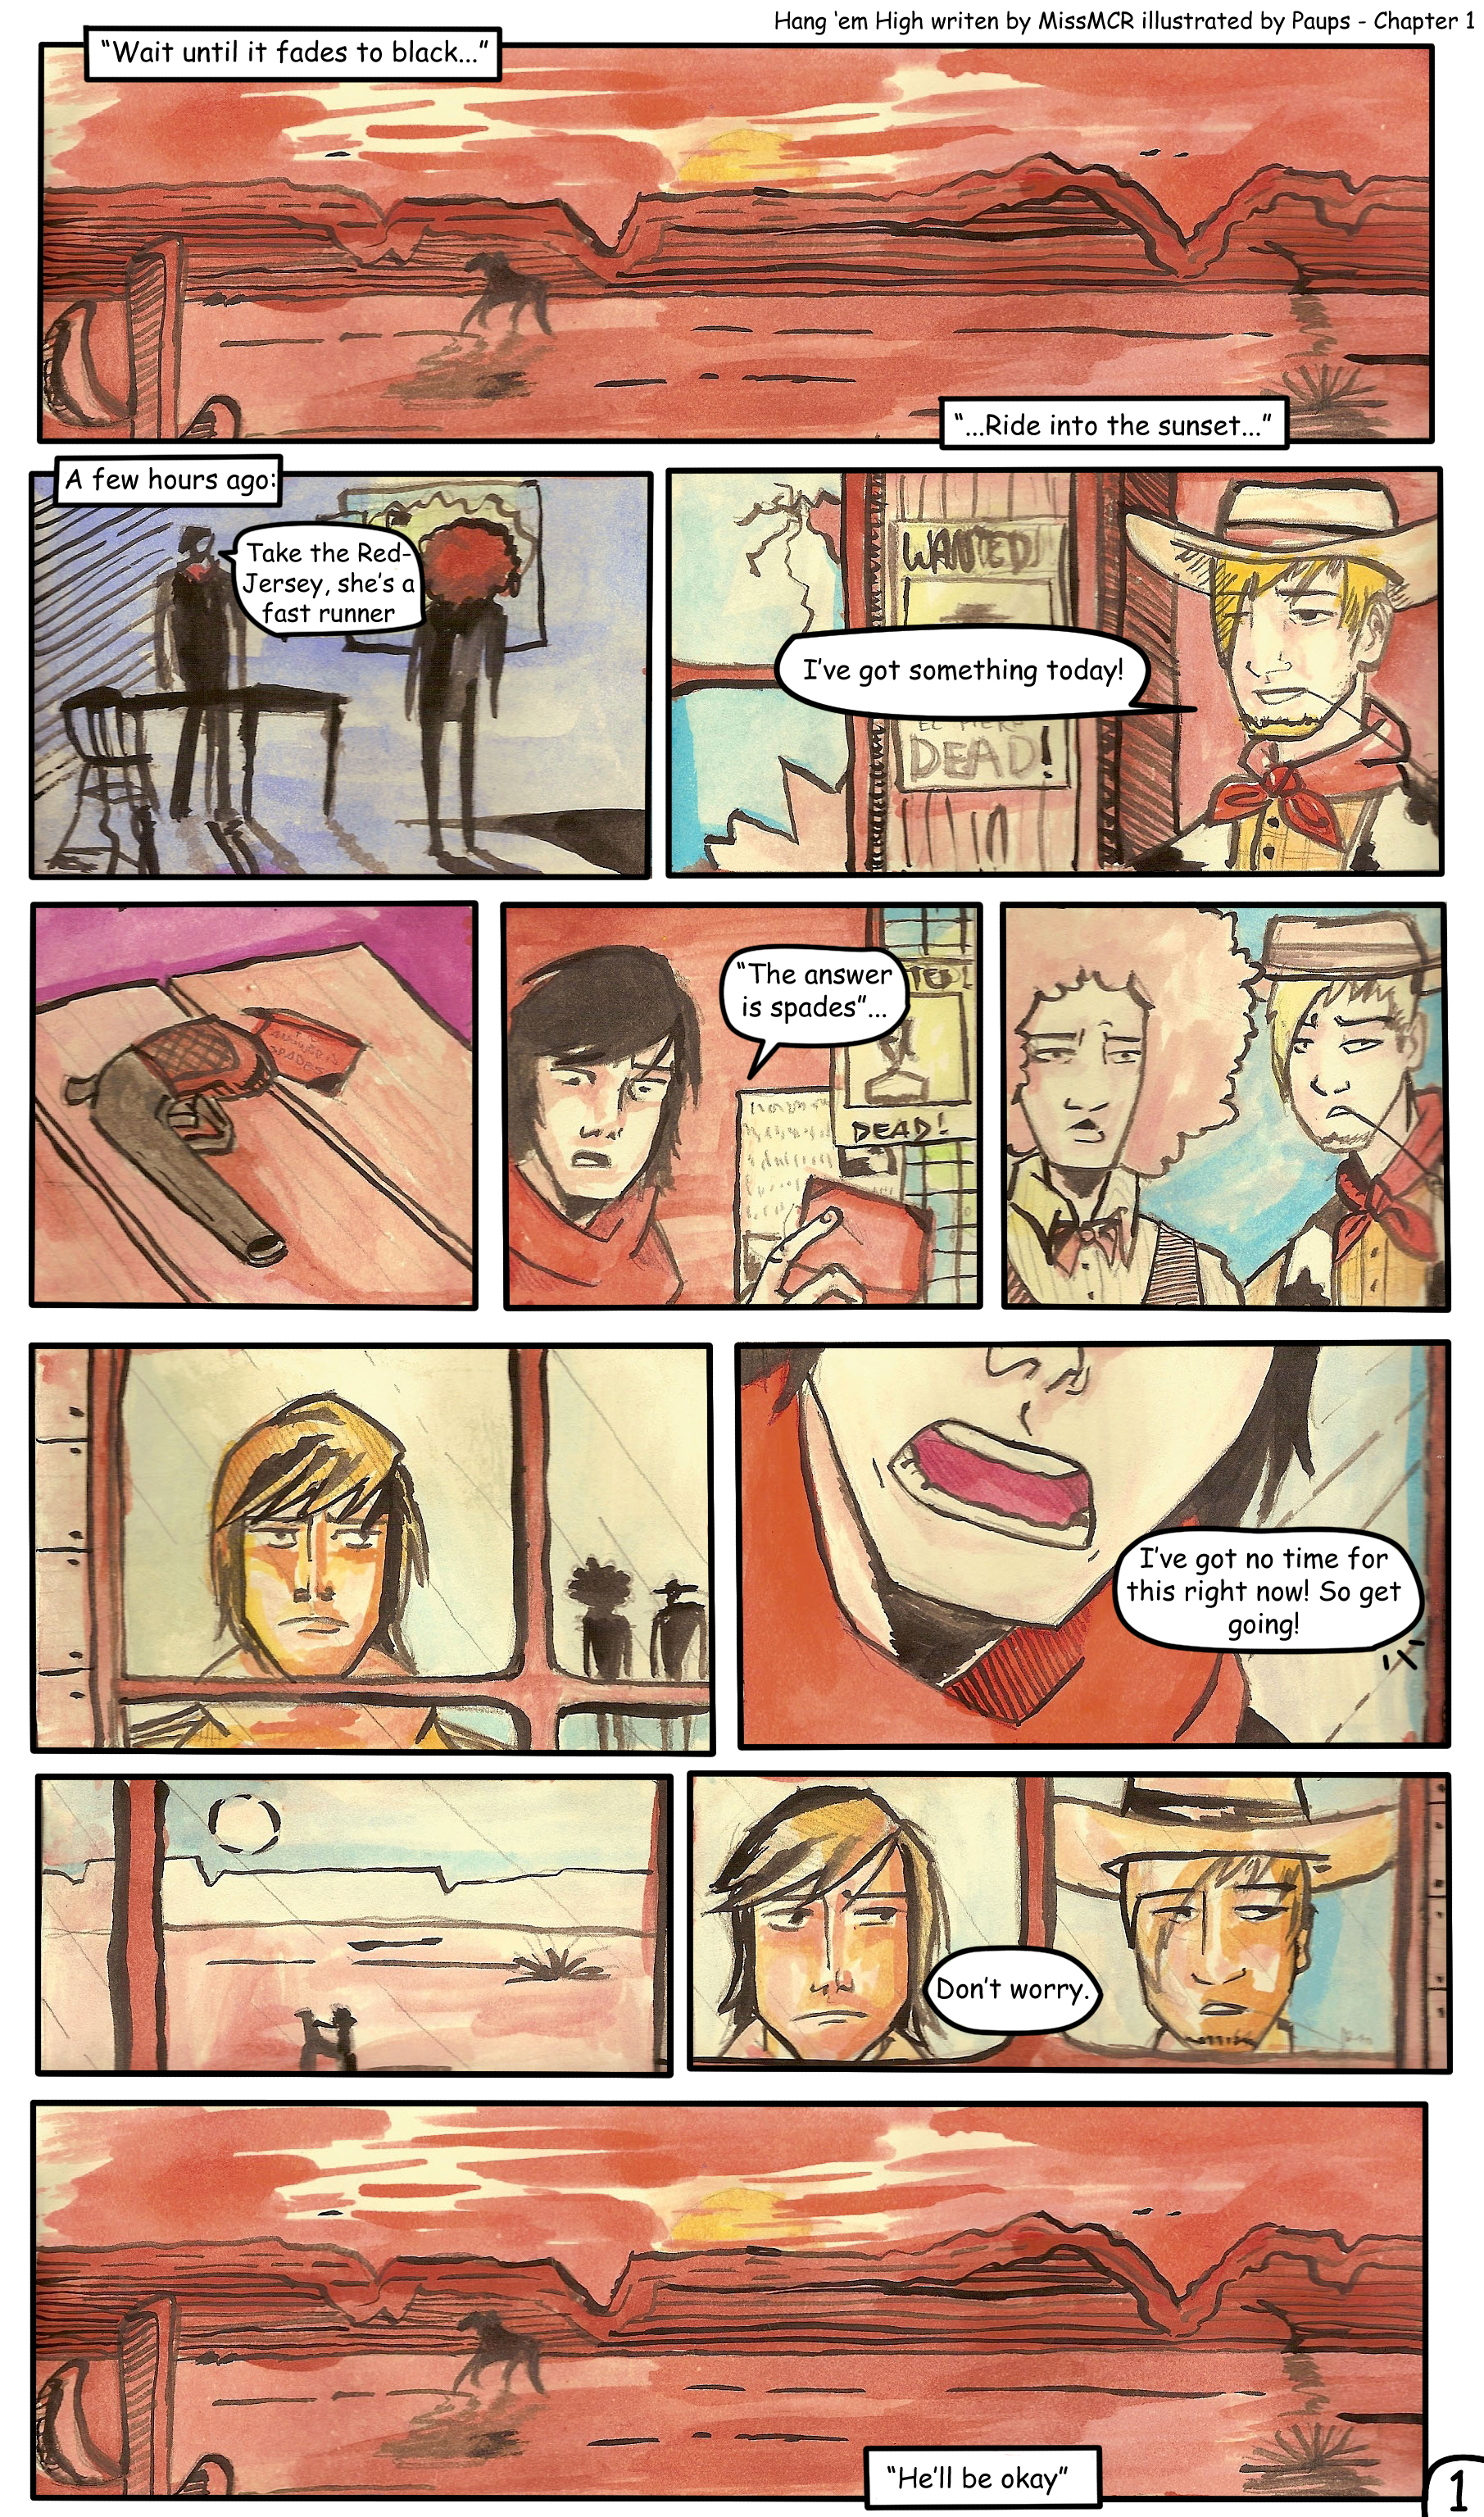 Chapter One - Page One